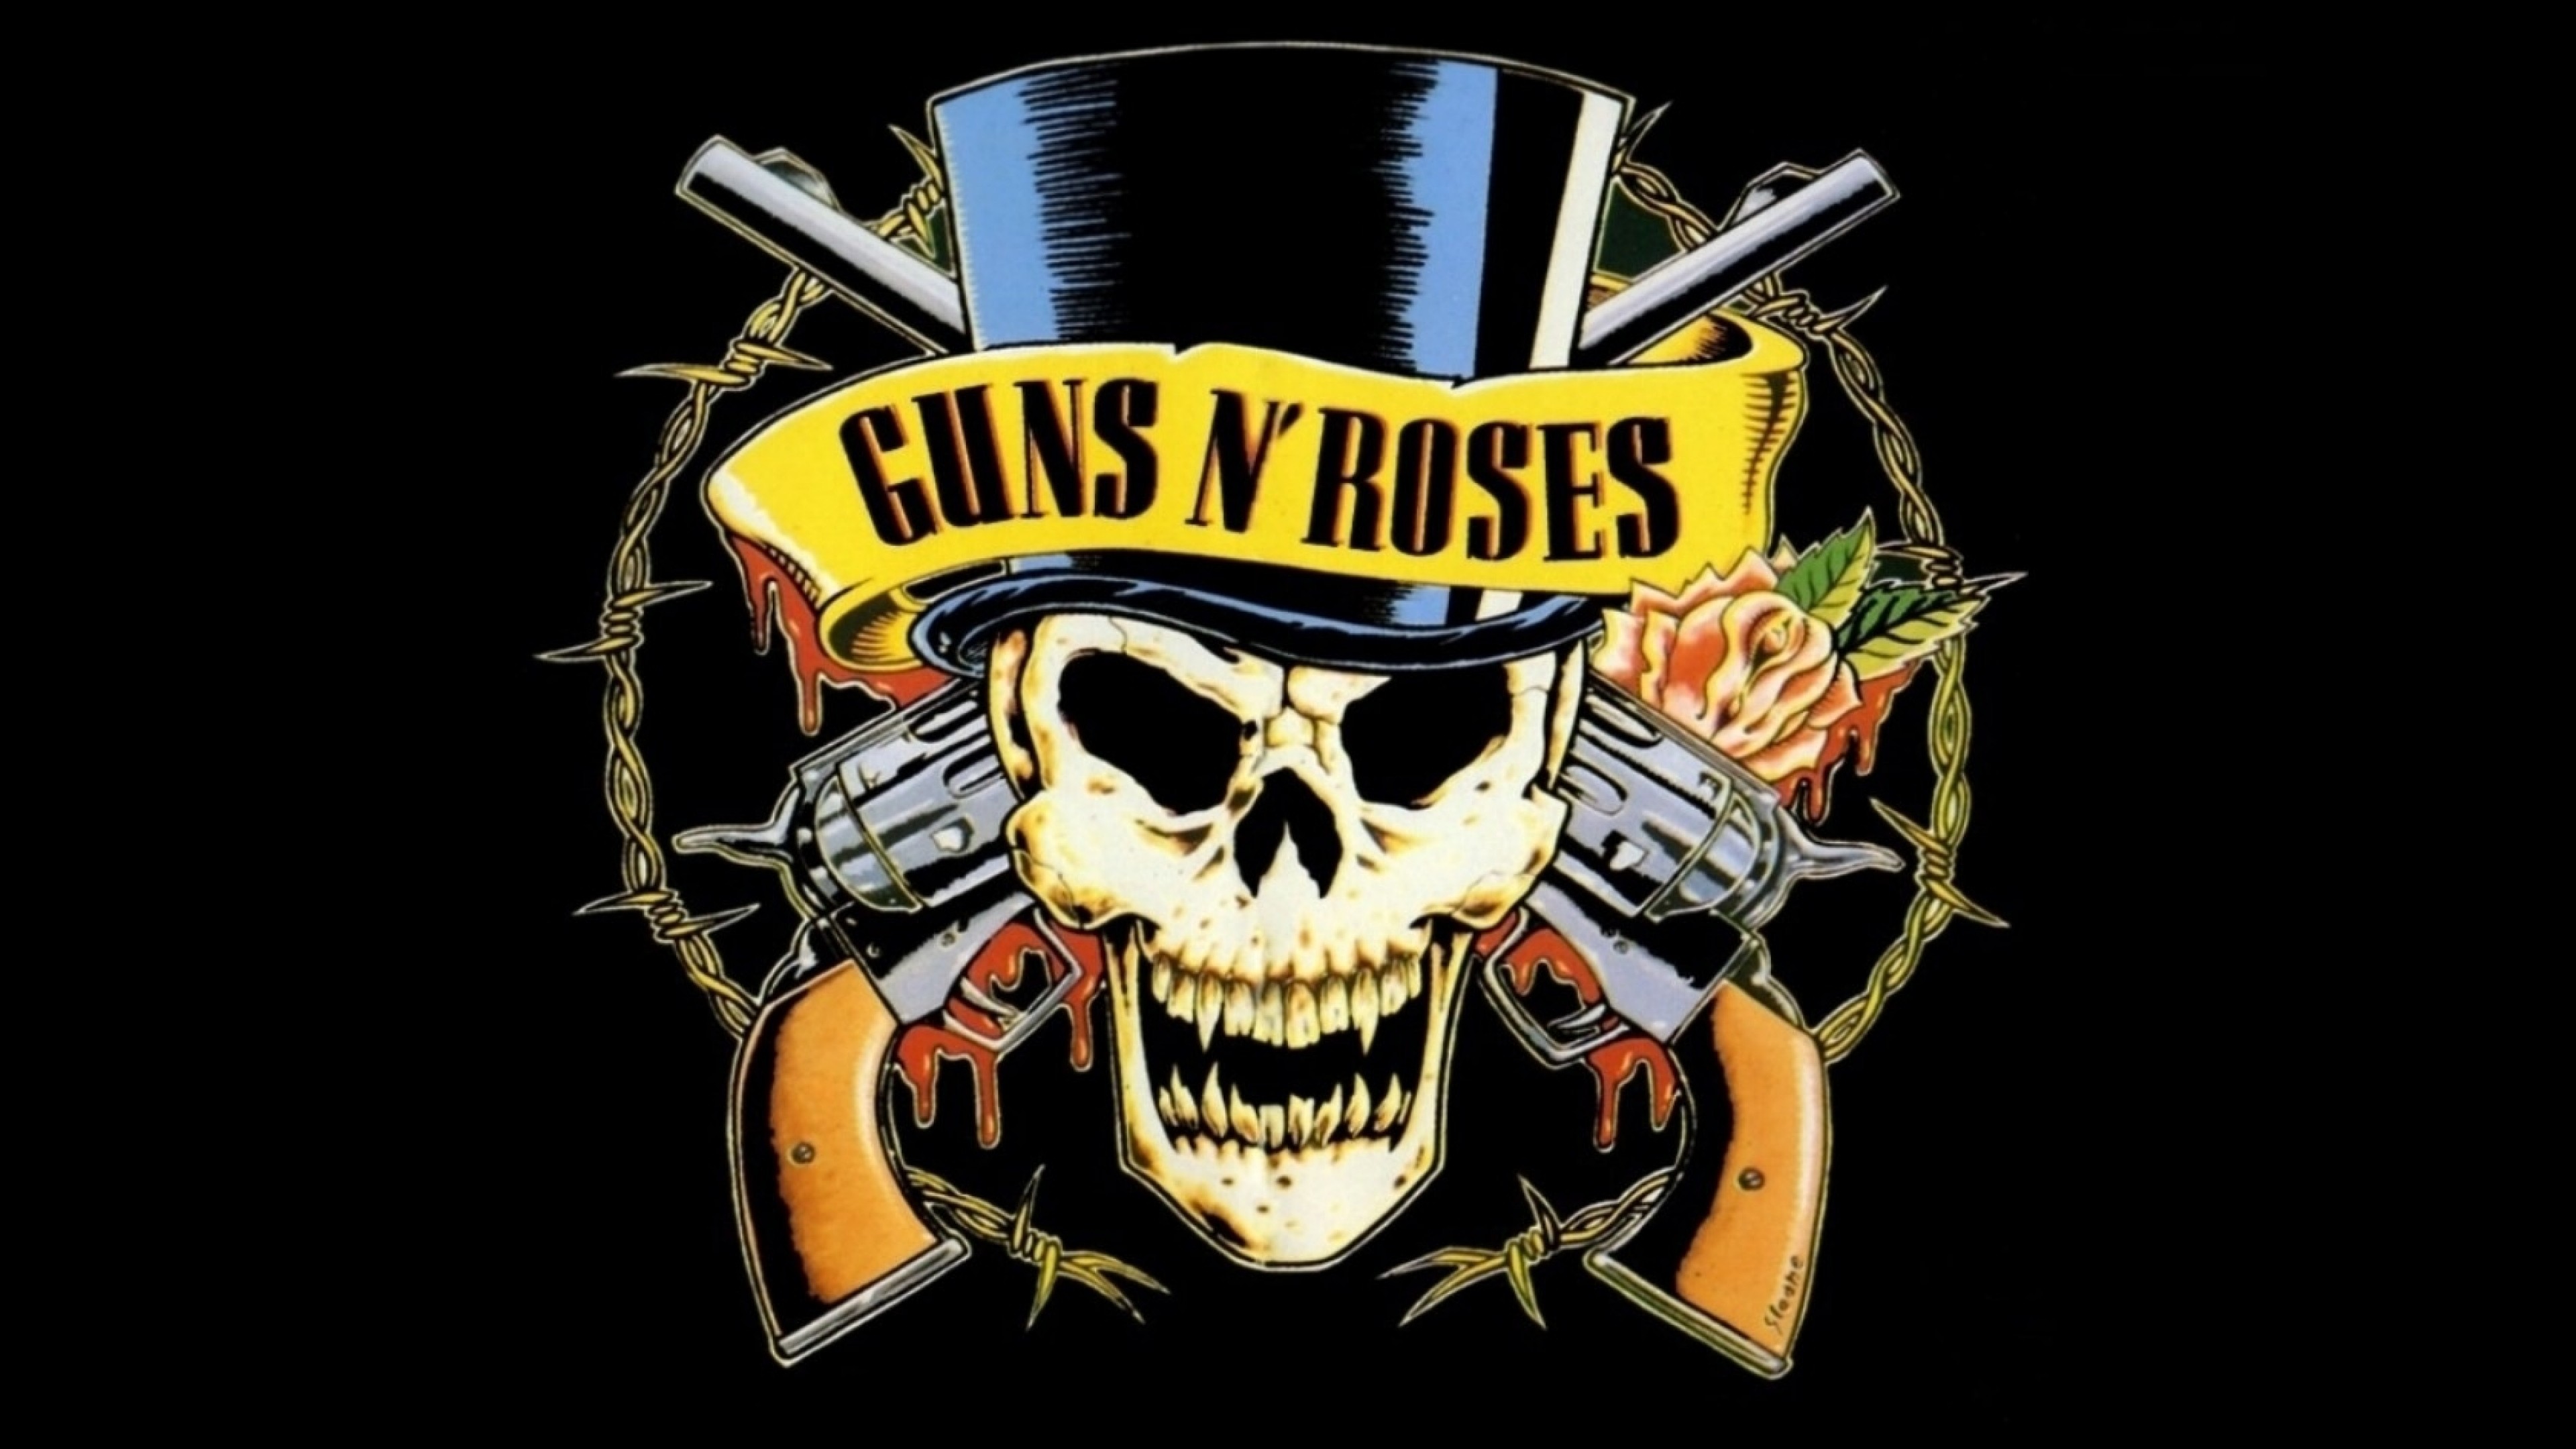 Guns And Roses IPhone Wallpaper  IPhone Wallpapers  iPhone Wallpapers